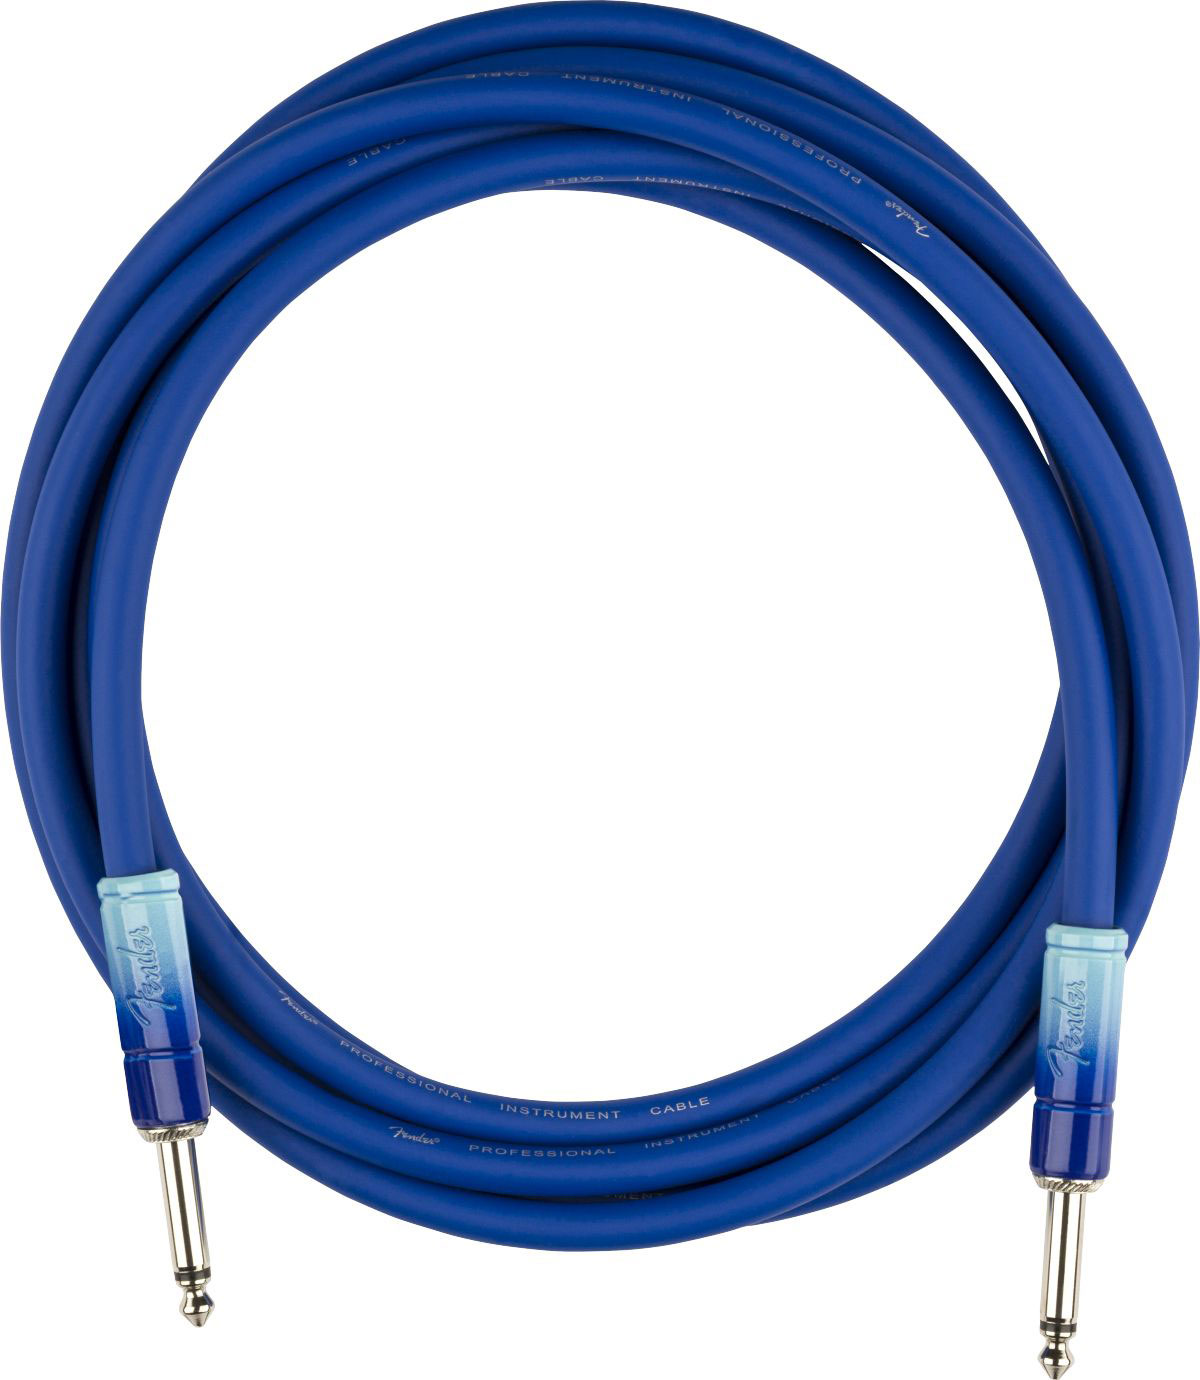 FENDER 10' OMBR CABLE BELAIR BLUE